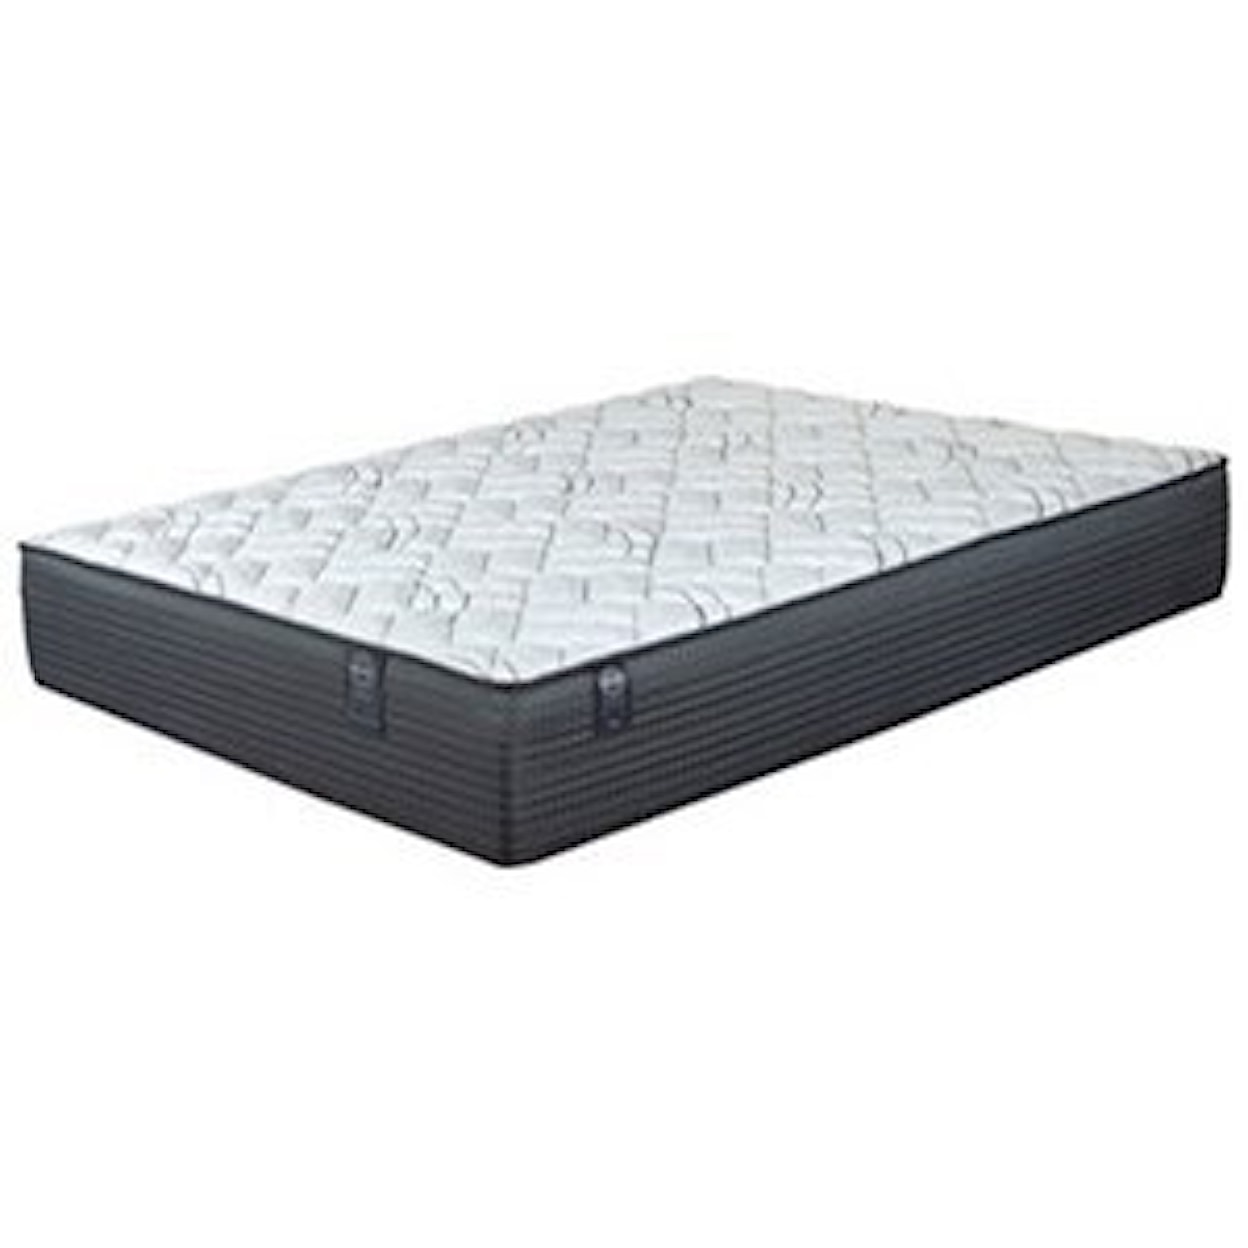 Restonic Duvall Firm Full 14" Firm Two Sided Mattress